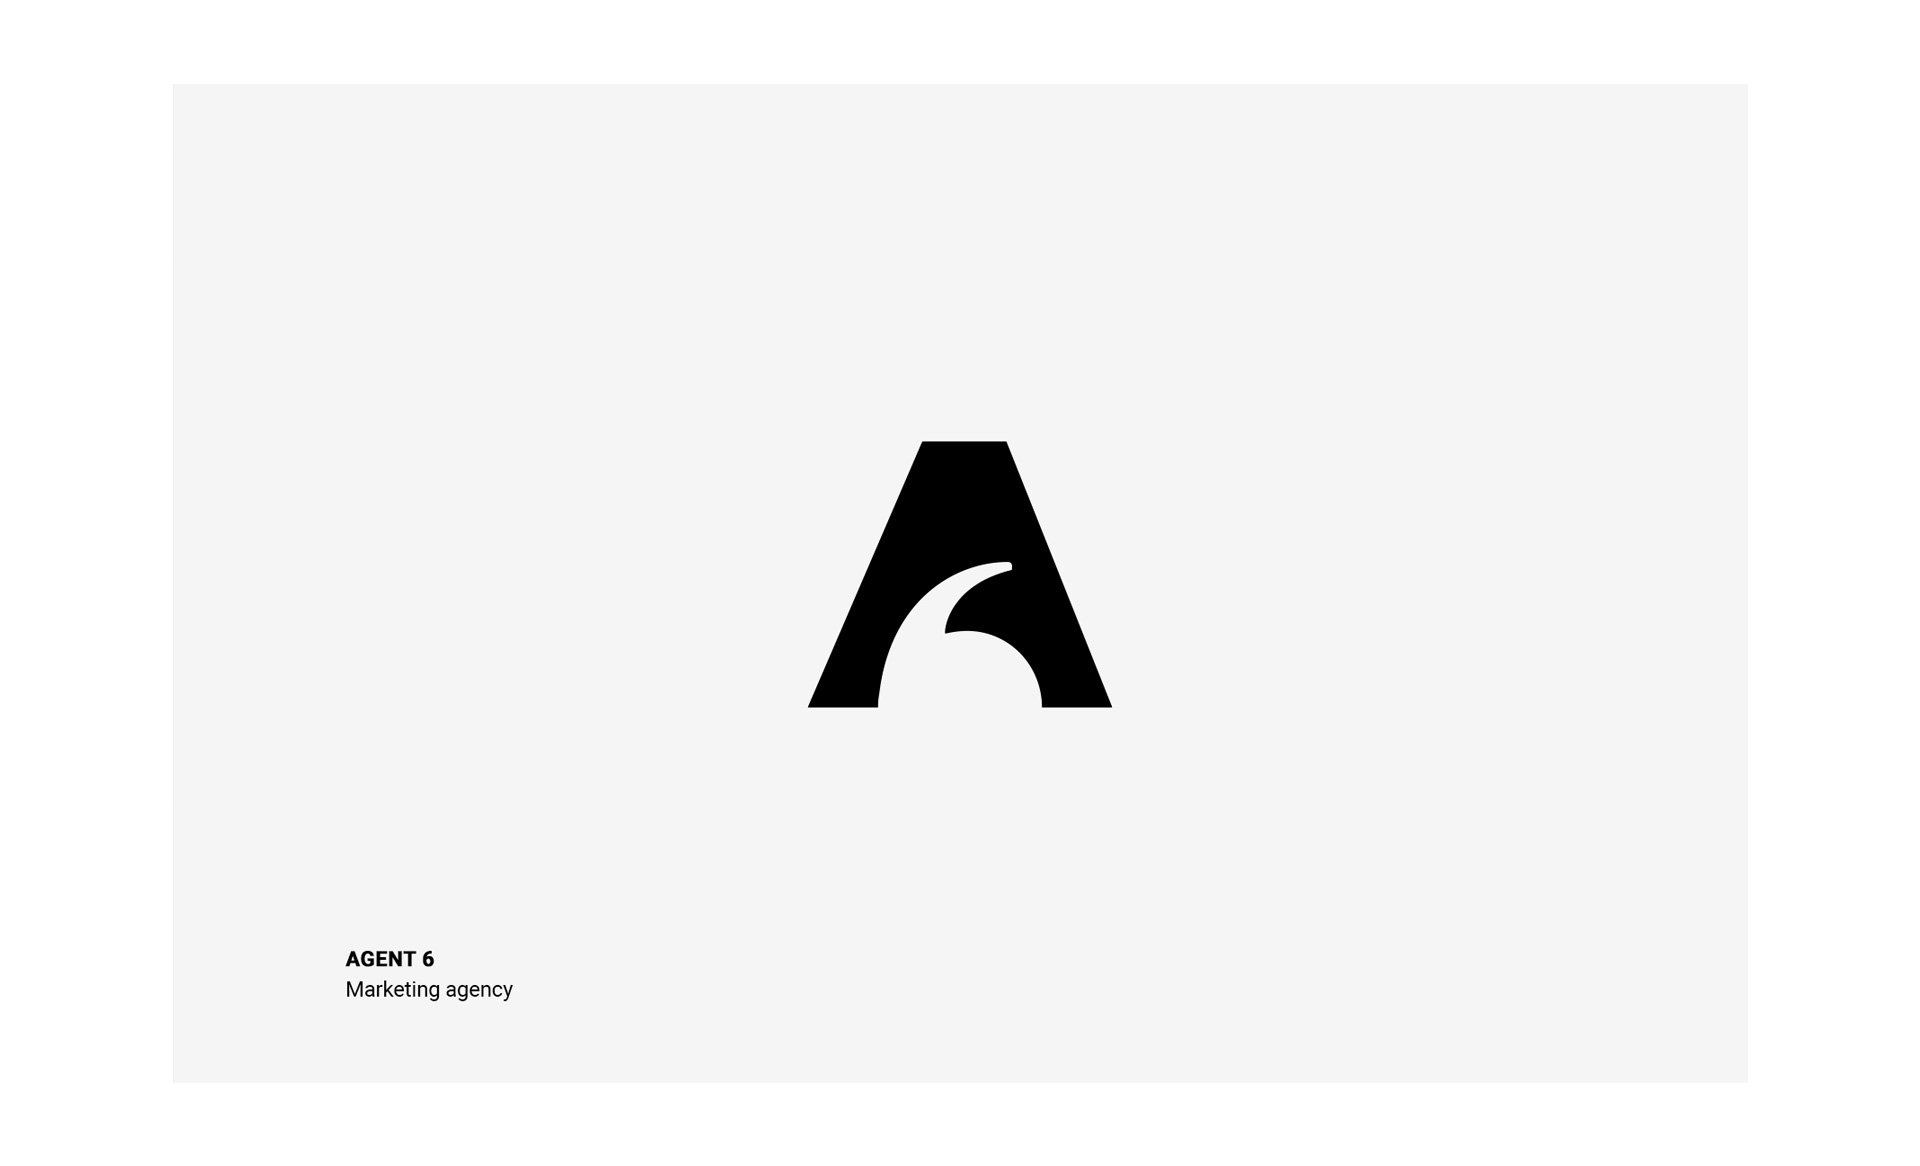 Logo for the marketing agency Agent 6